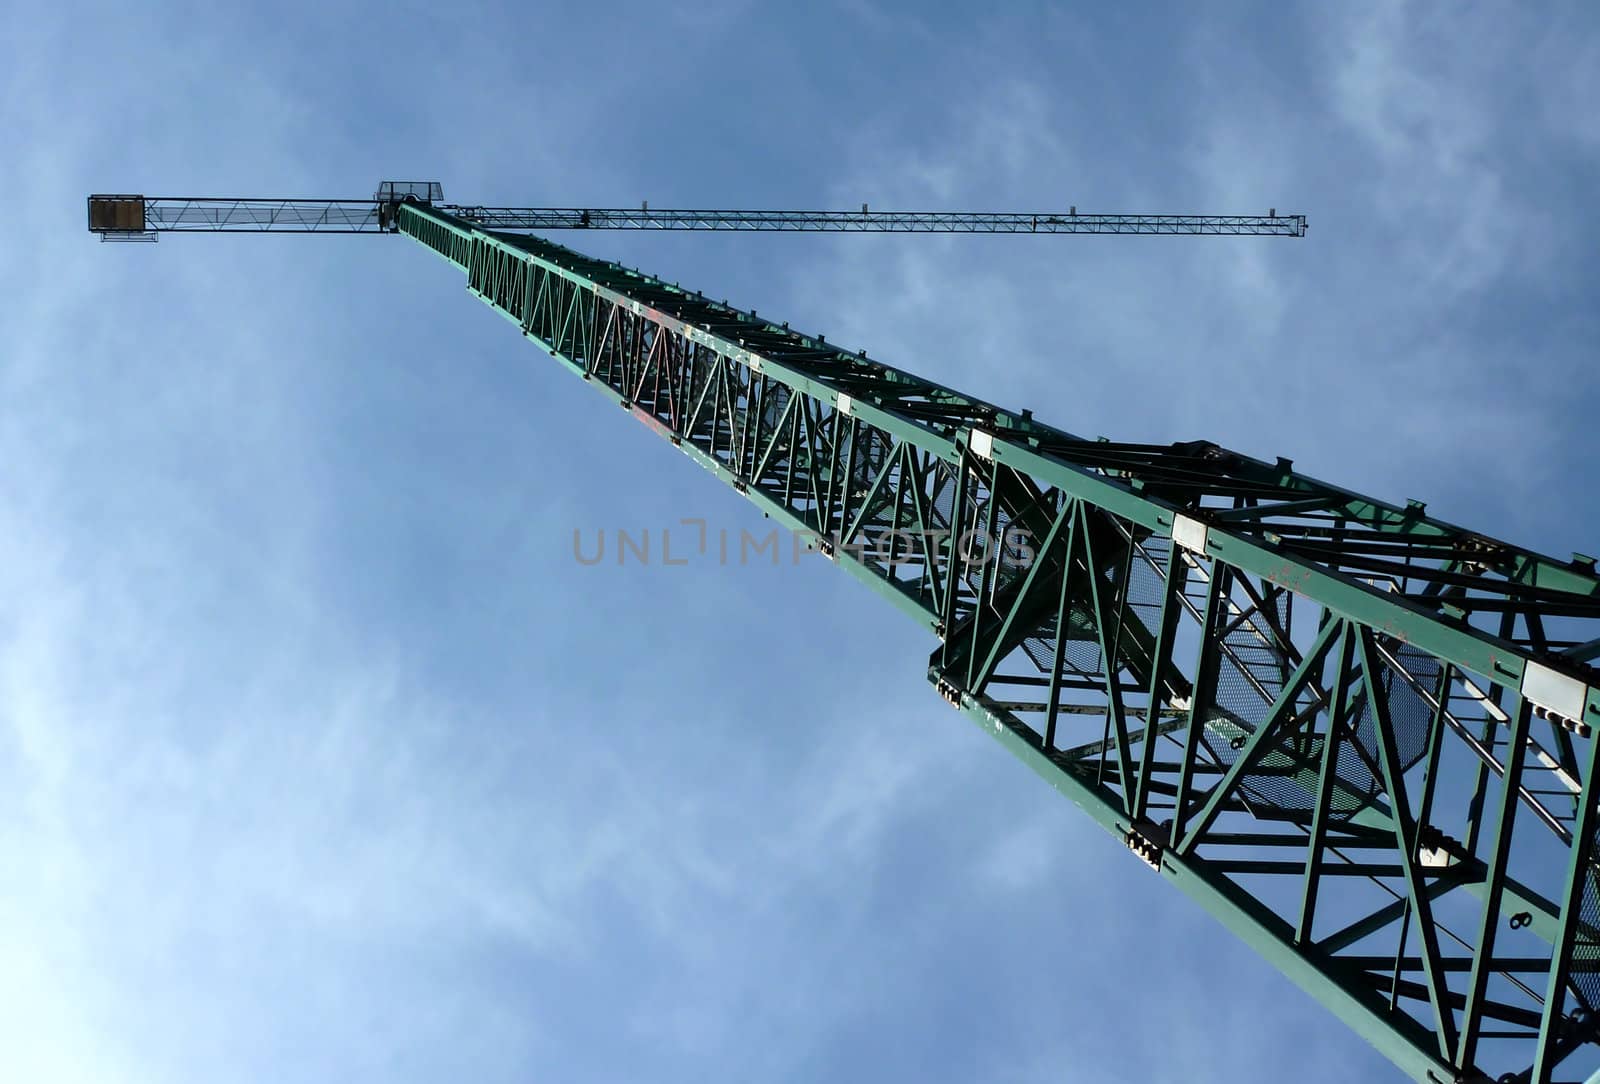 Big green crane with a background of a cloudy blue sky